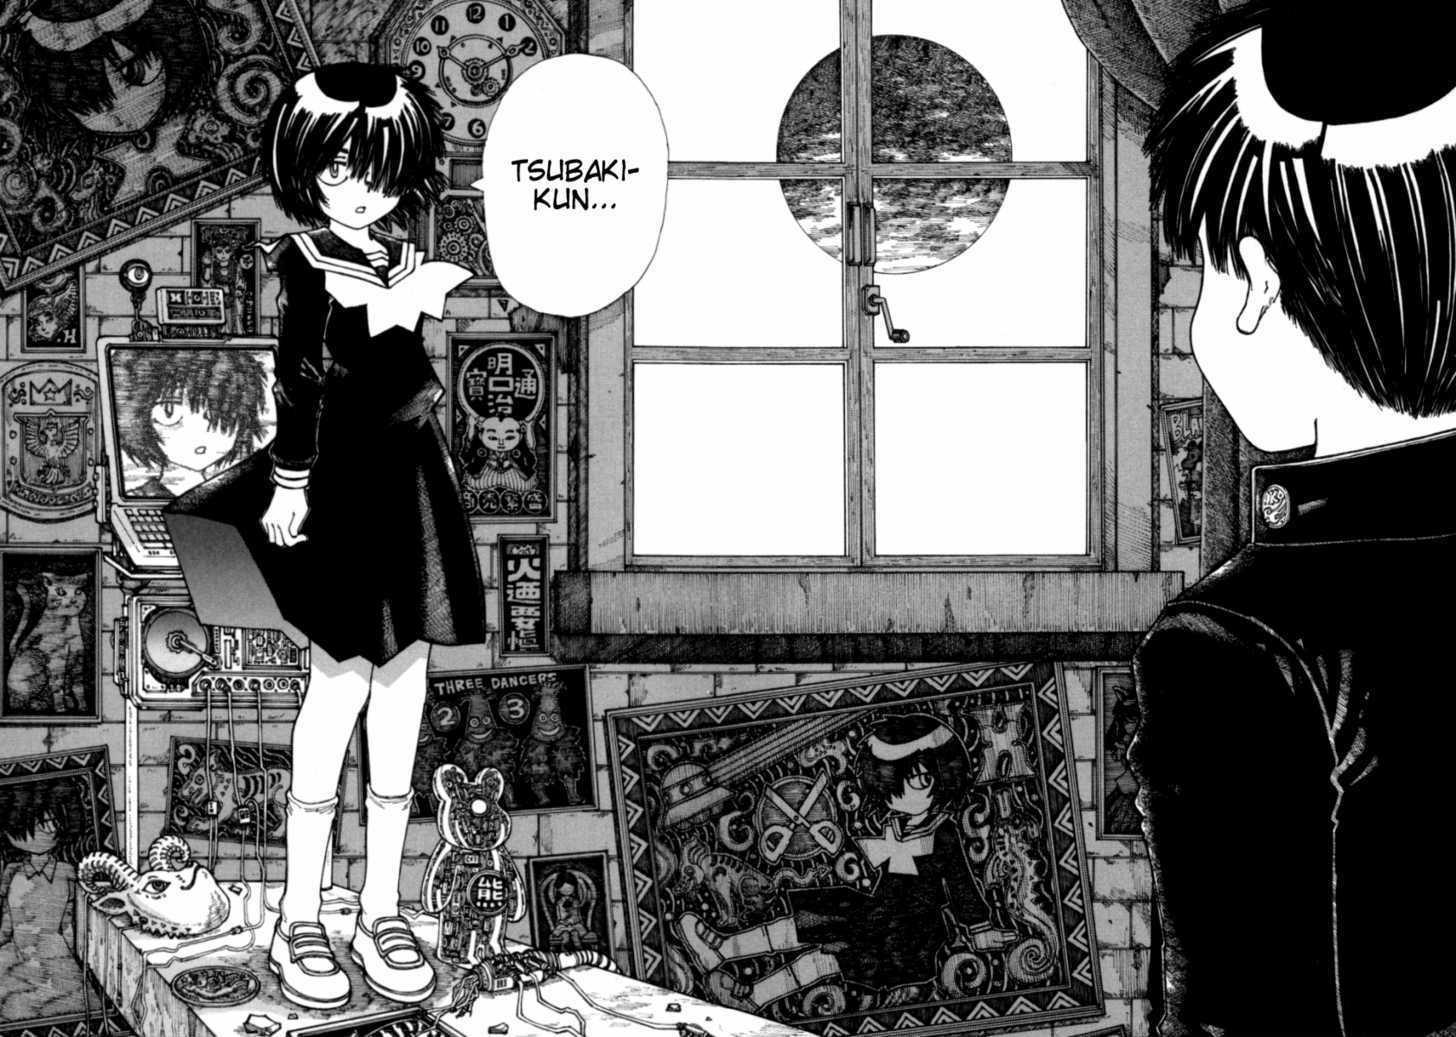 Read Mysterious Girlfriend X Vol.11 Chapter 82 : The Mysterious